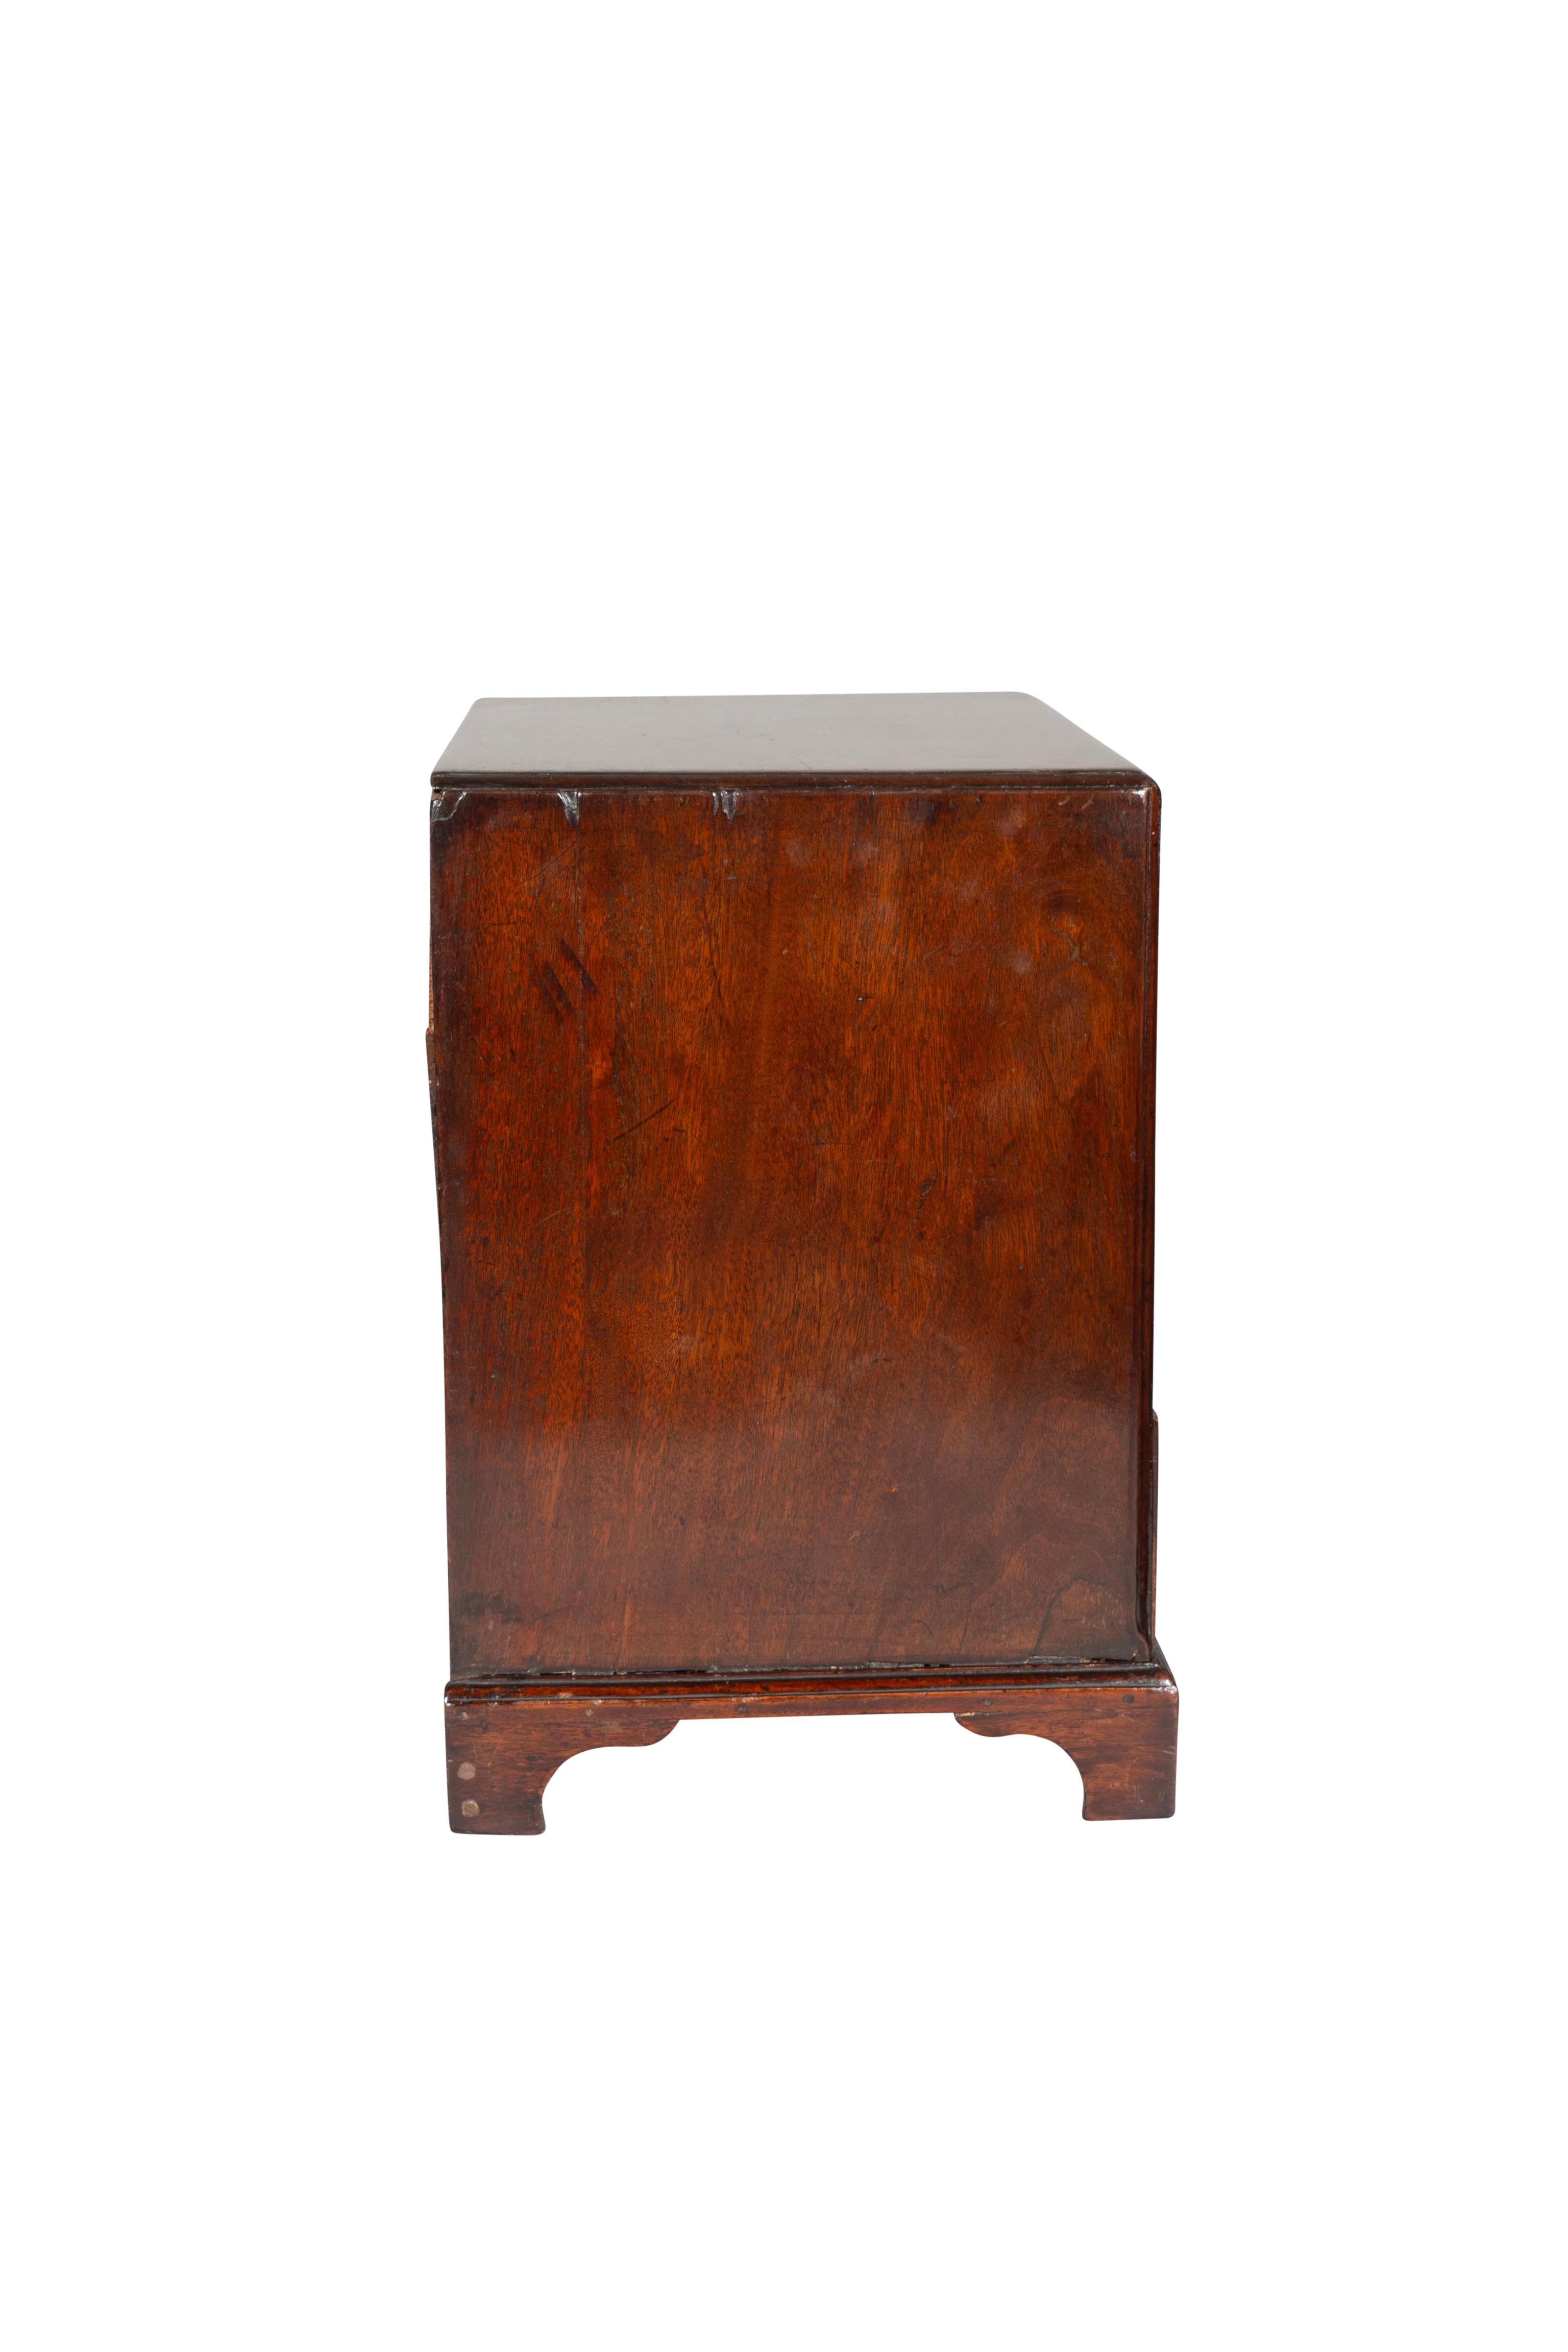 English George III Mahogany Miniature Chest Of Drawers For Sale